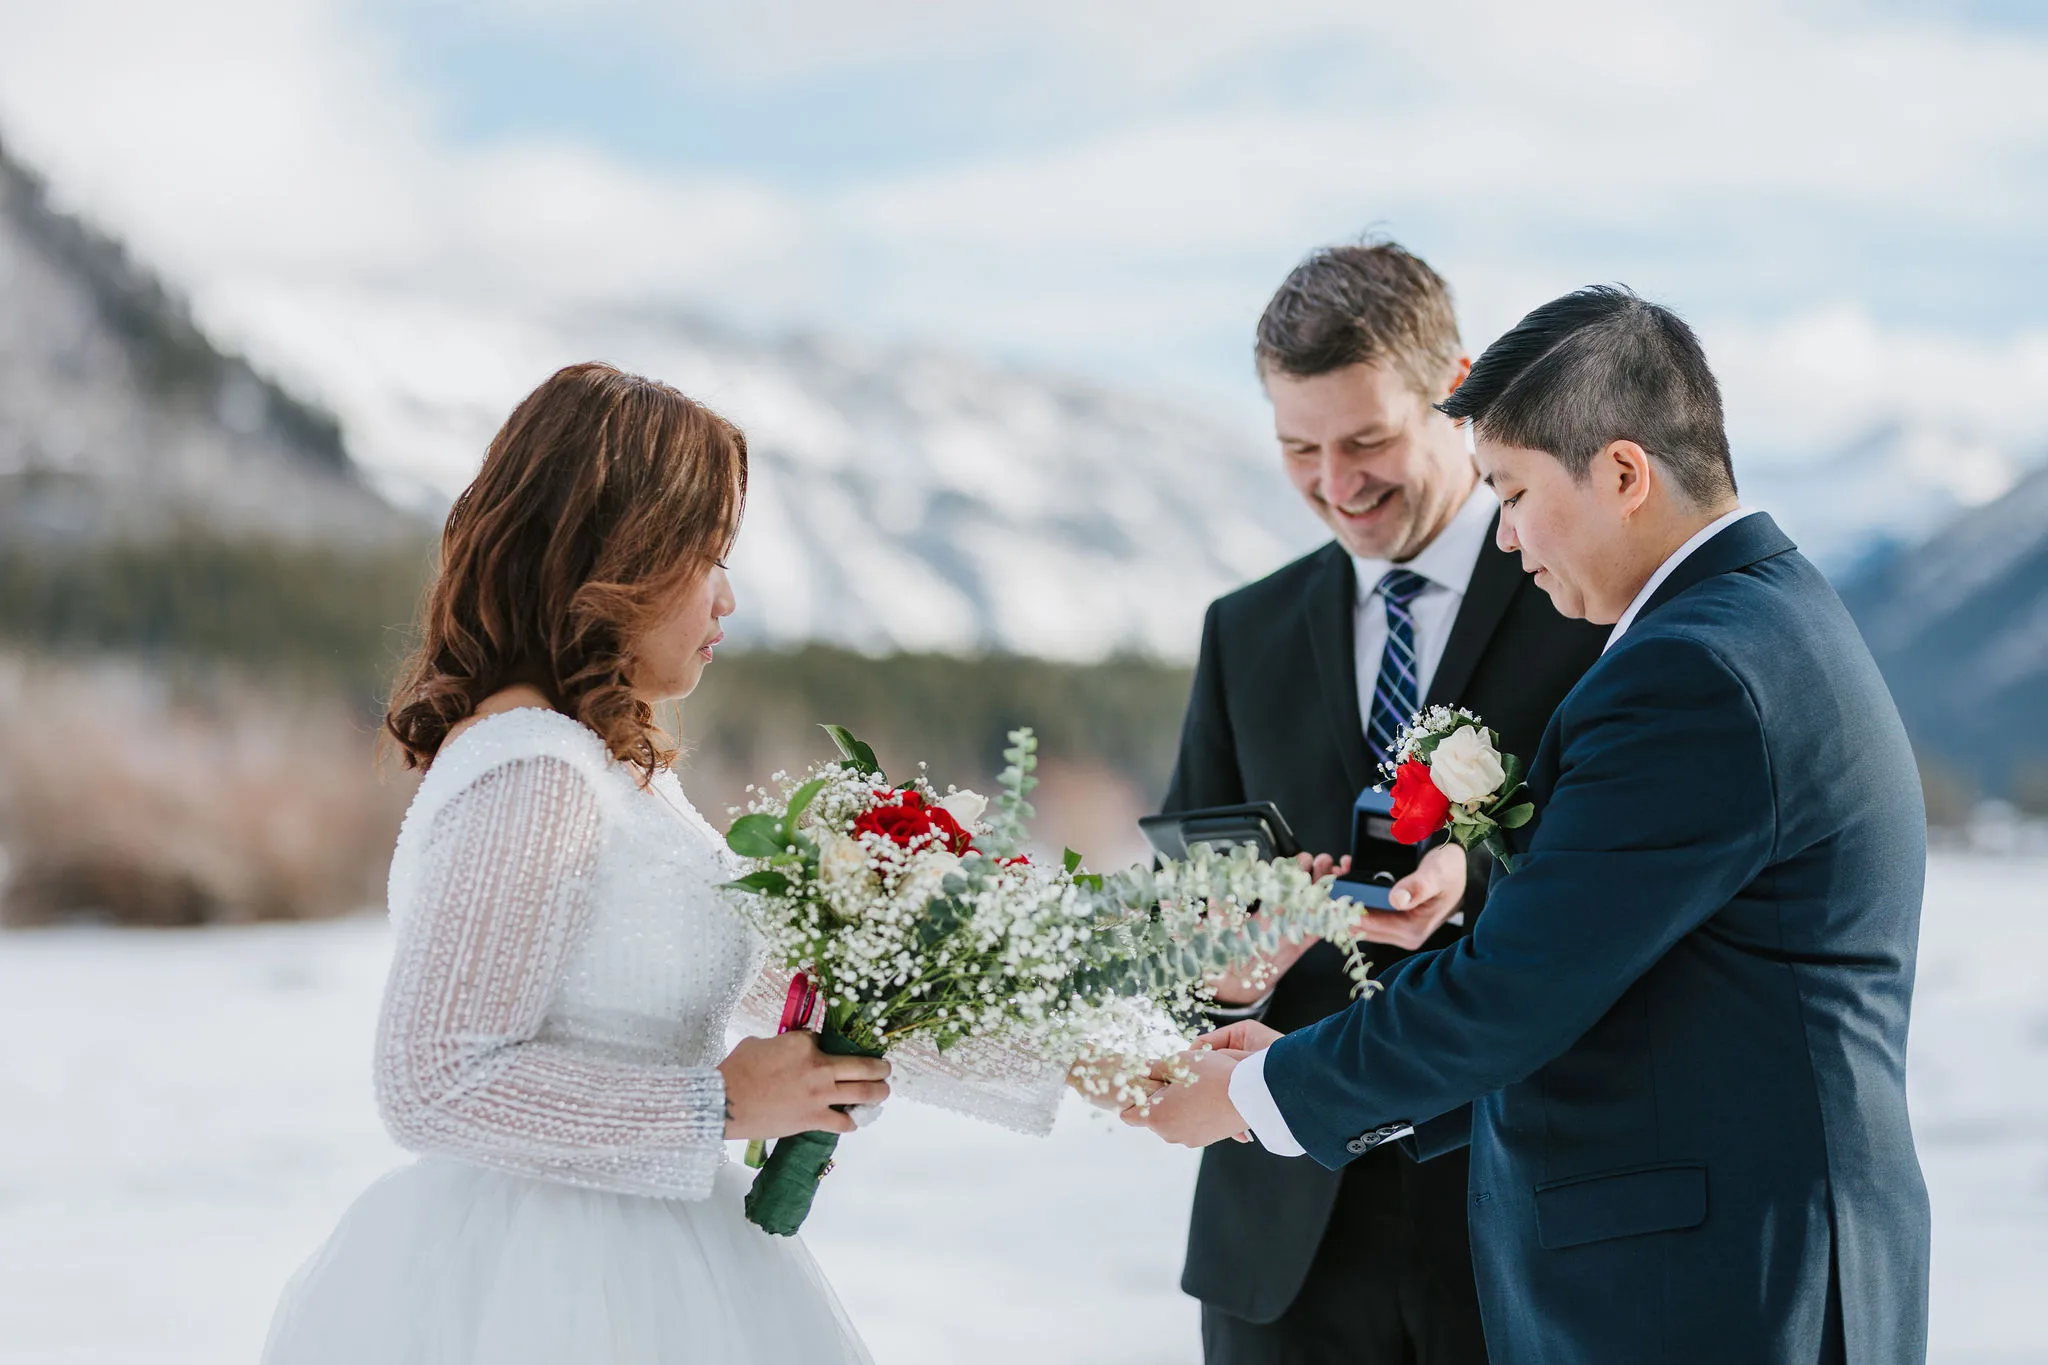 Kathlane and Michelle exchanging rings at their elopement in Banff with Officiant Rich from Young Hip & Married